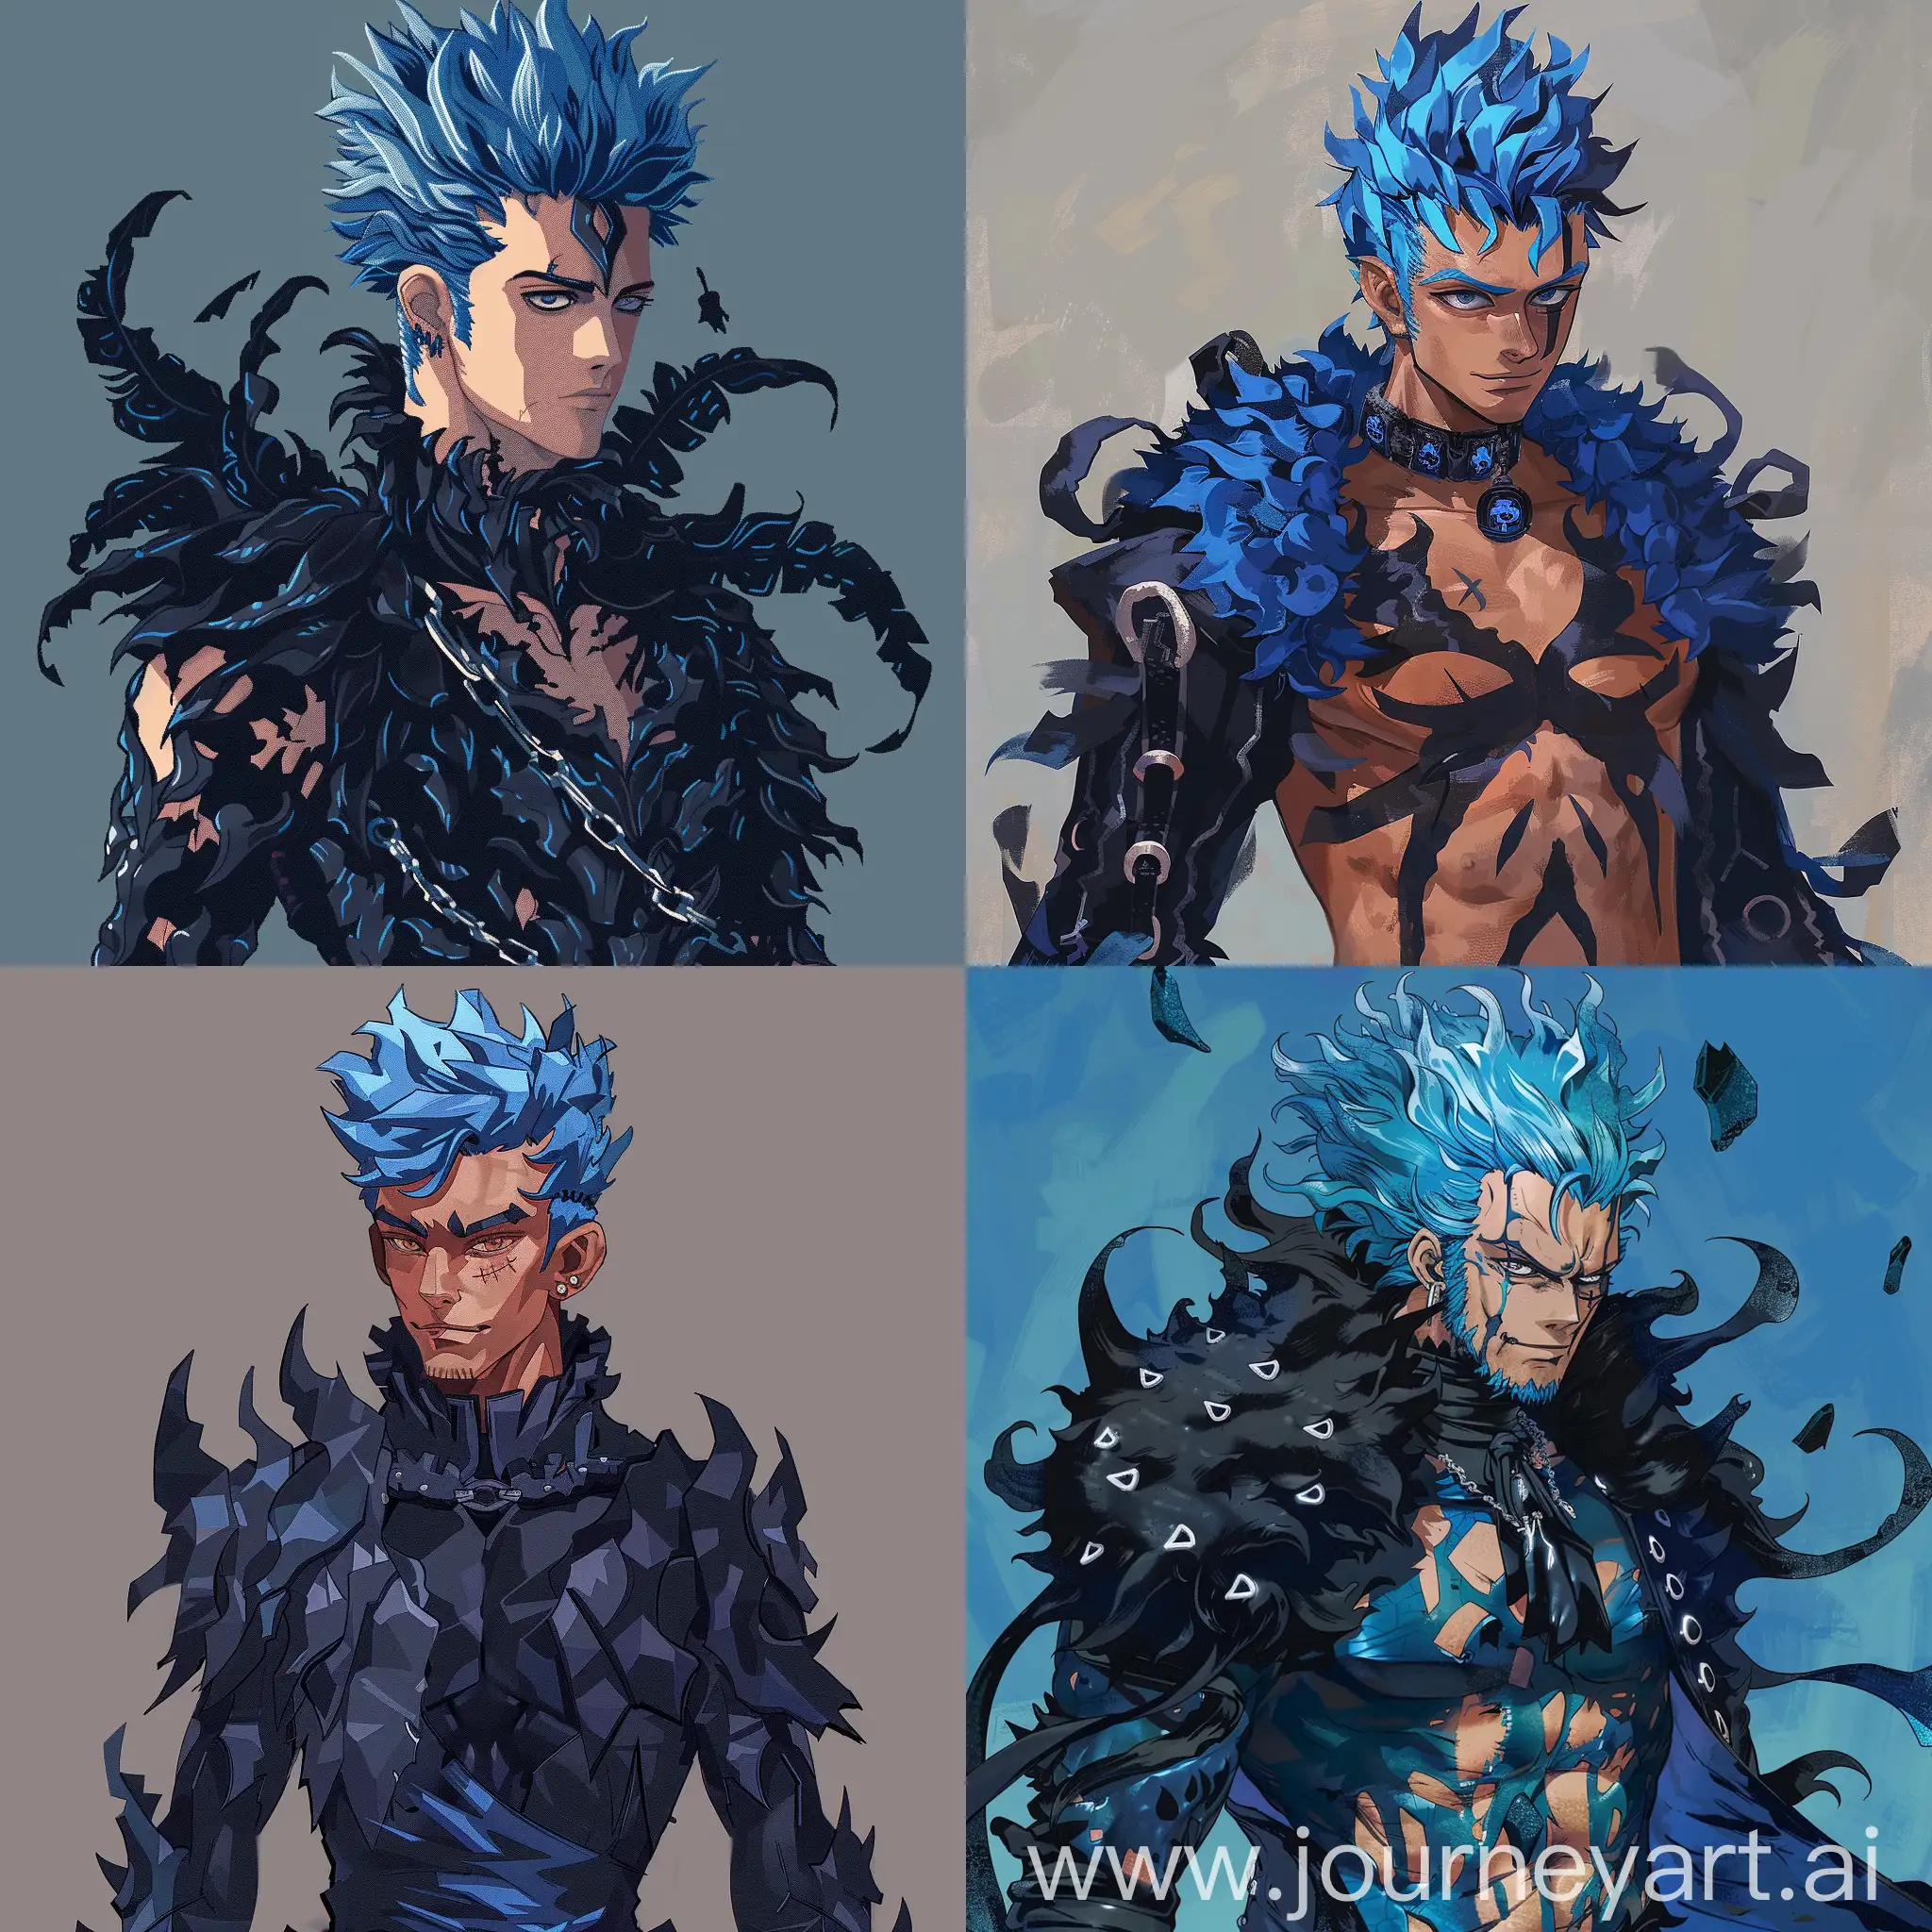 Create a 64 bit pixel detailed character art for a male protagonist with blue hair with, unique black and dark blue costume in one piece artstyle